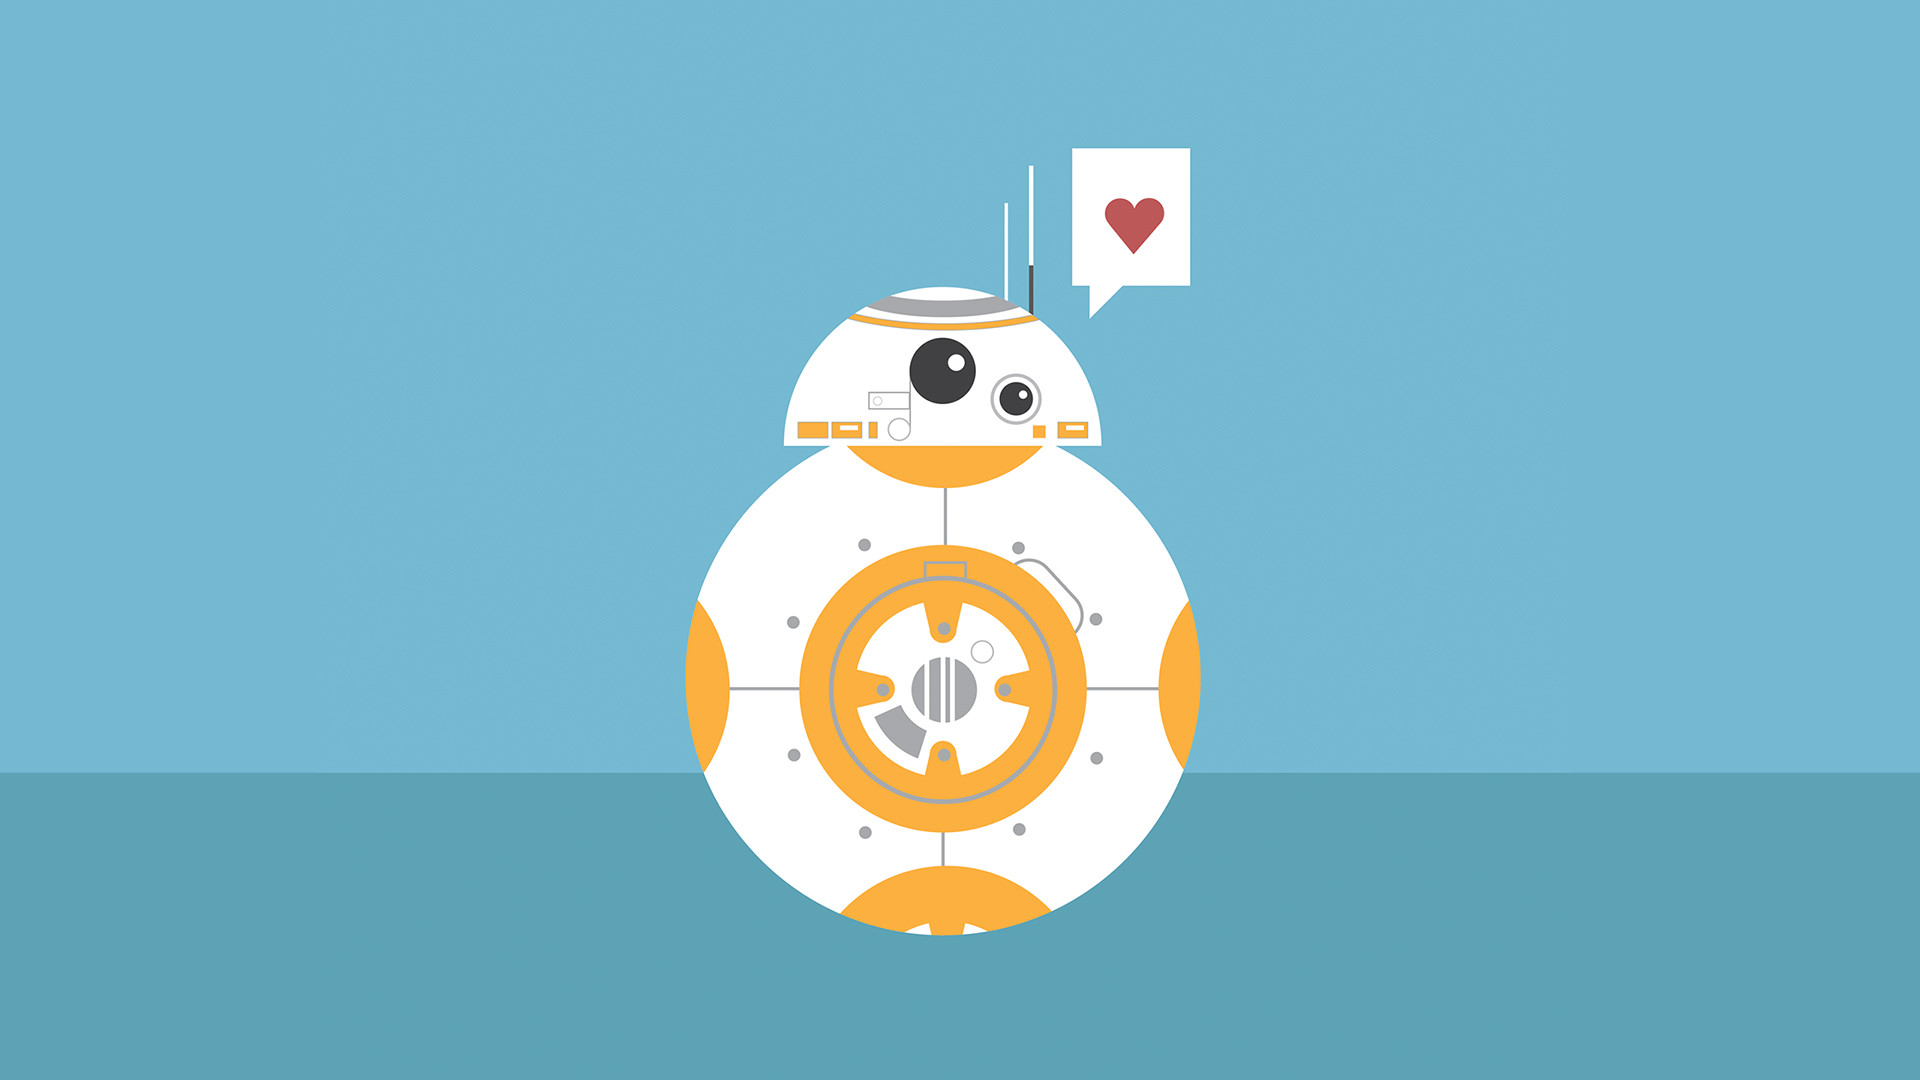 BB-8 by Virginia Poltrack